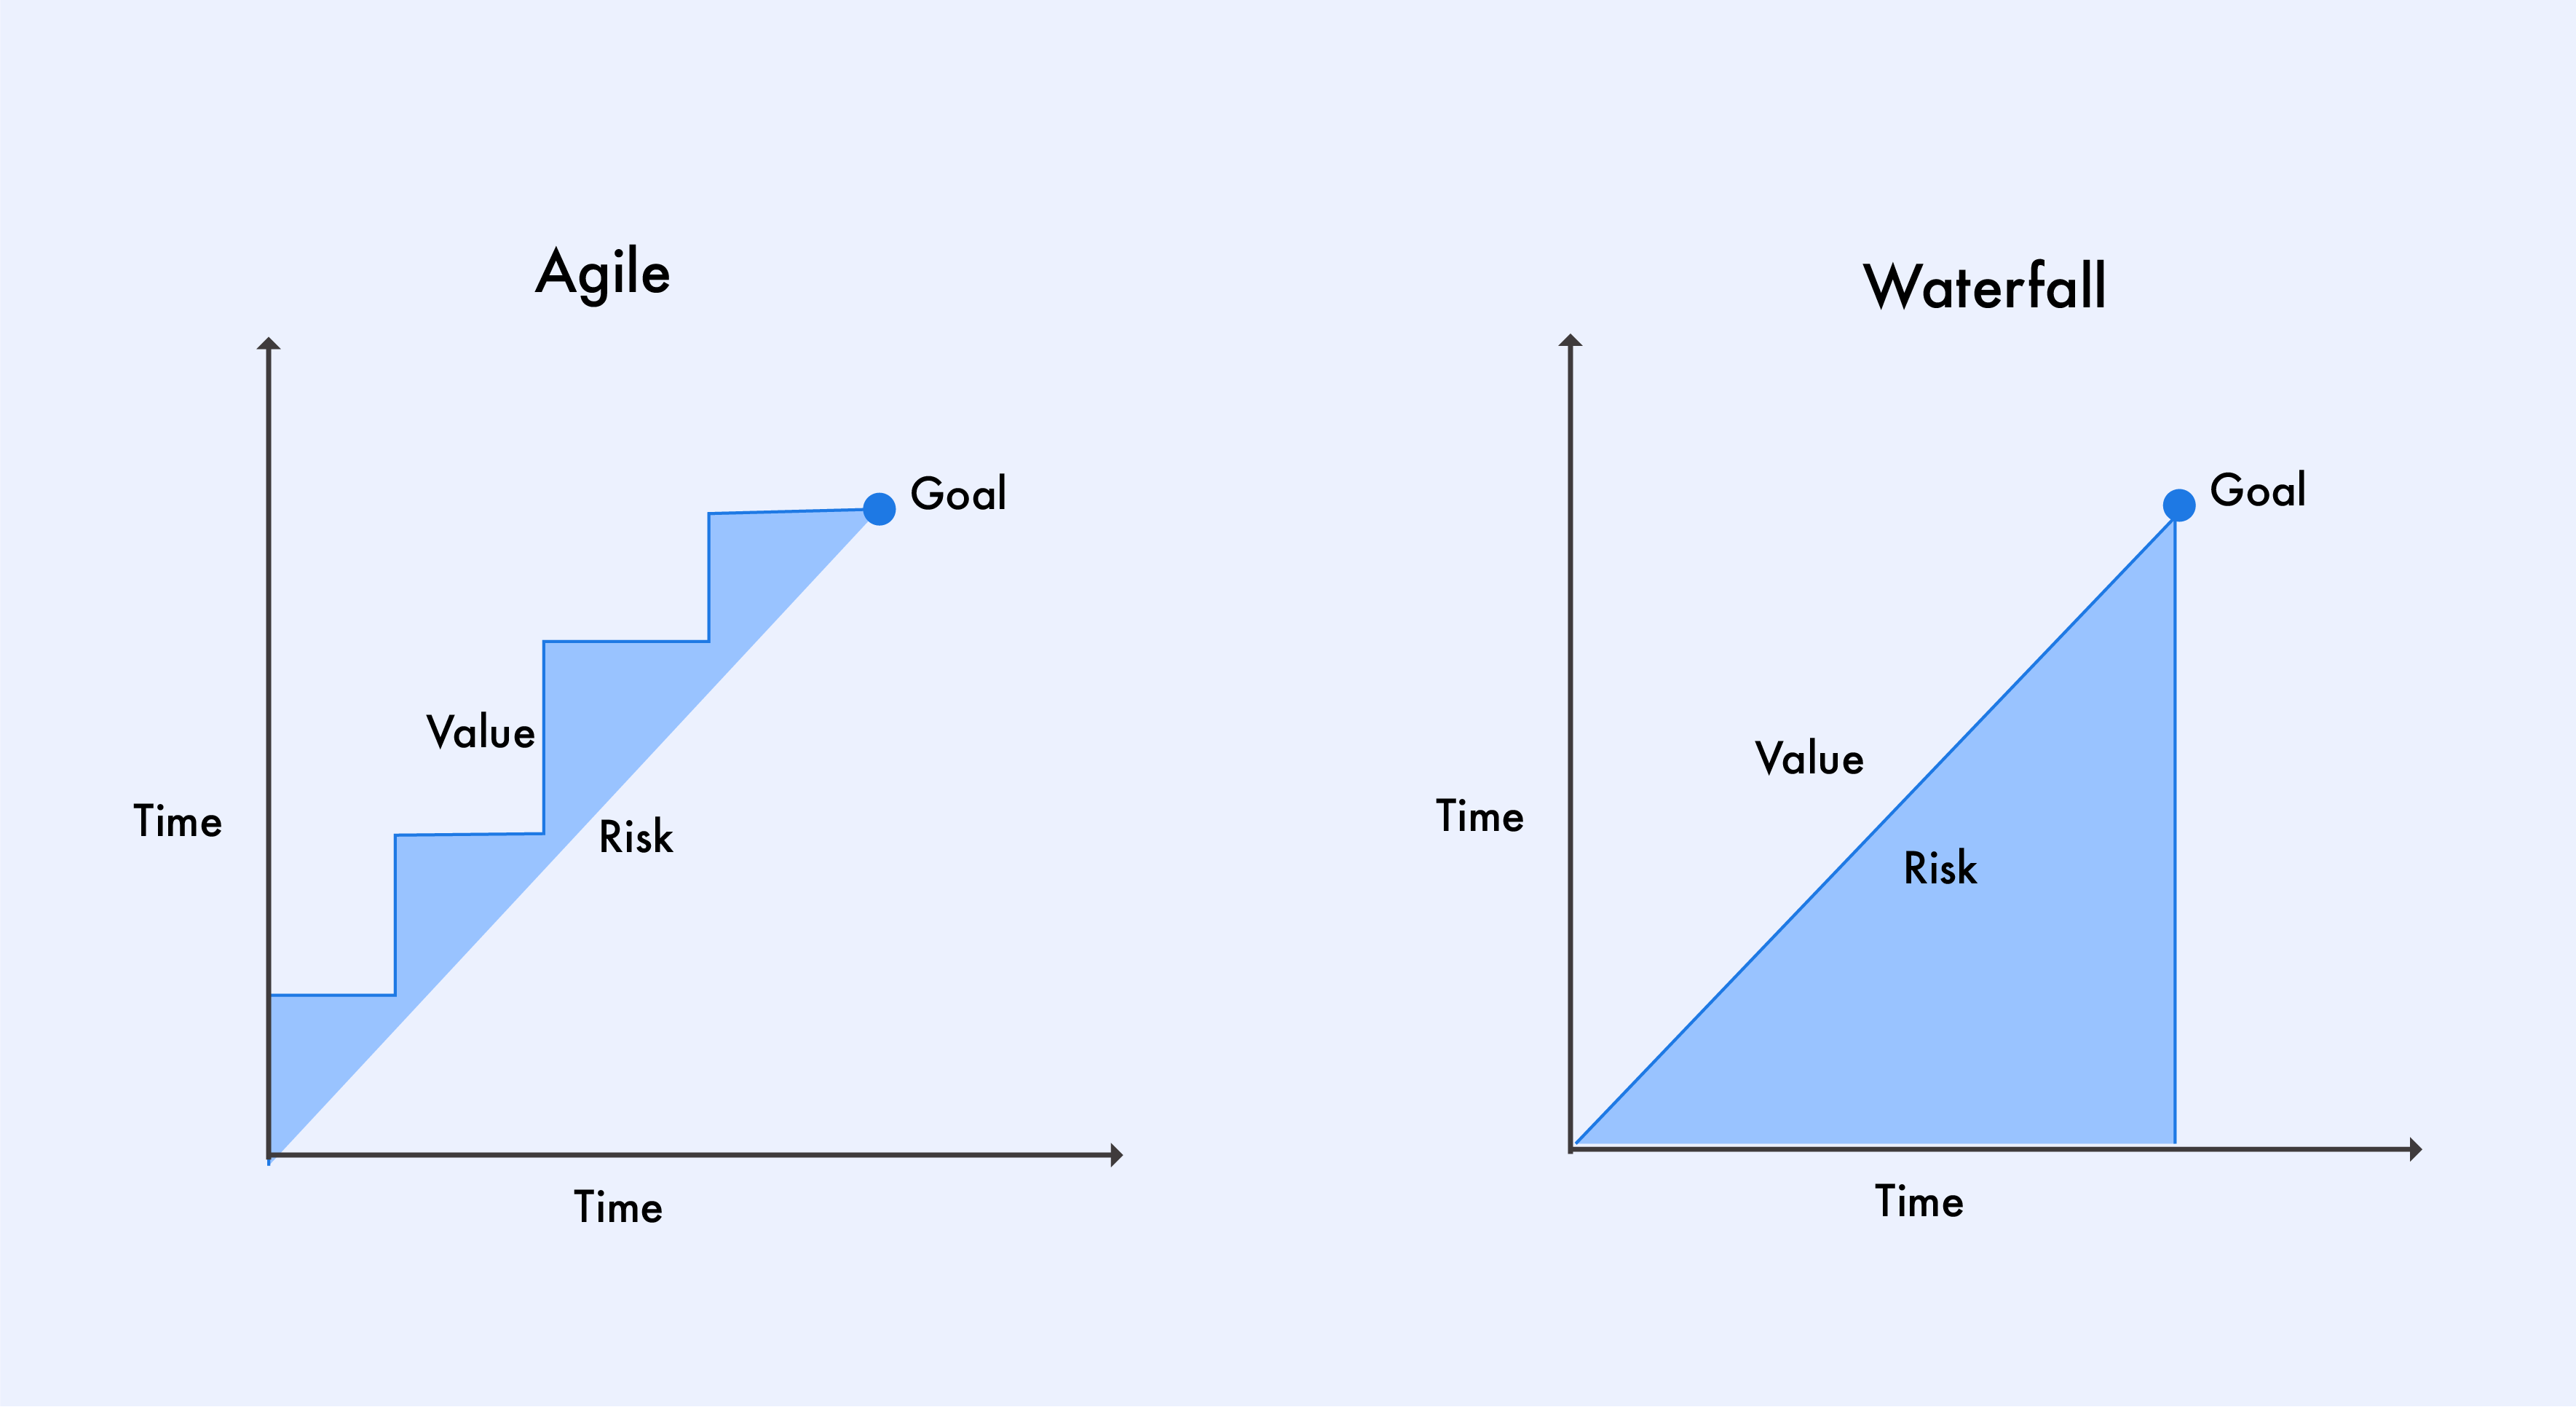 Waterfall vs Agile Risk Assessment  | Image By iPF Softwares